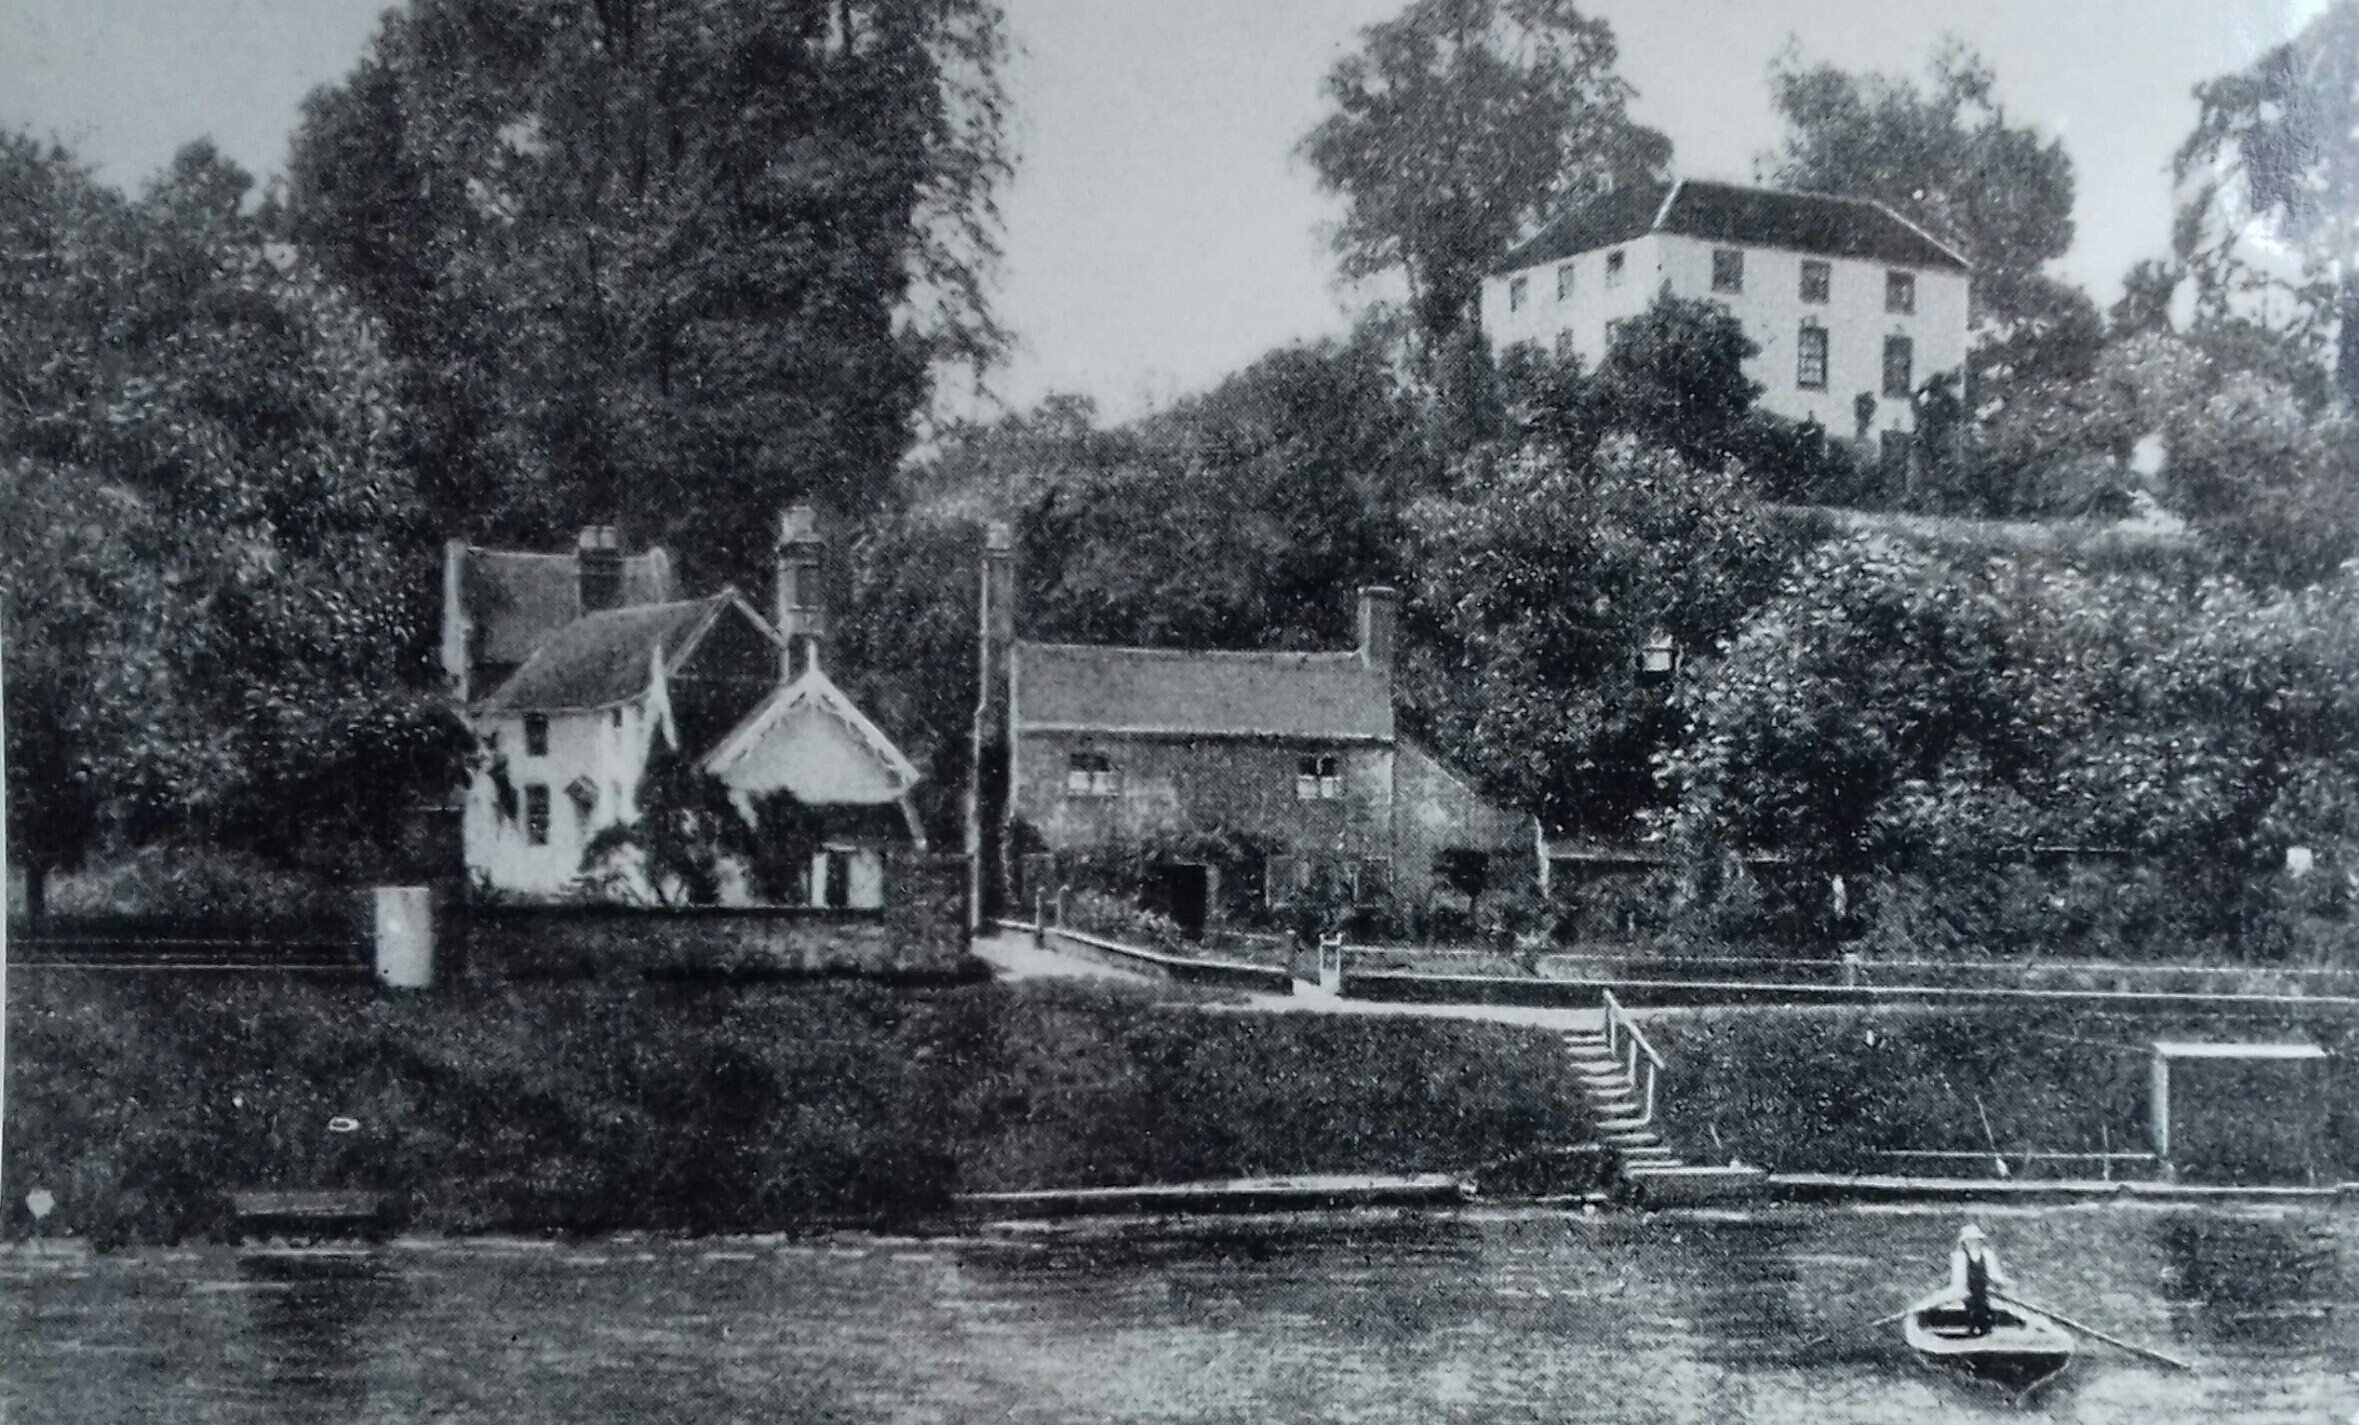 The Dog and Duck ferry opposite Pitchcroft in Edwardian times. It was here the illuminated procession performed the complicated manoeuvre of turning round